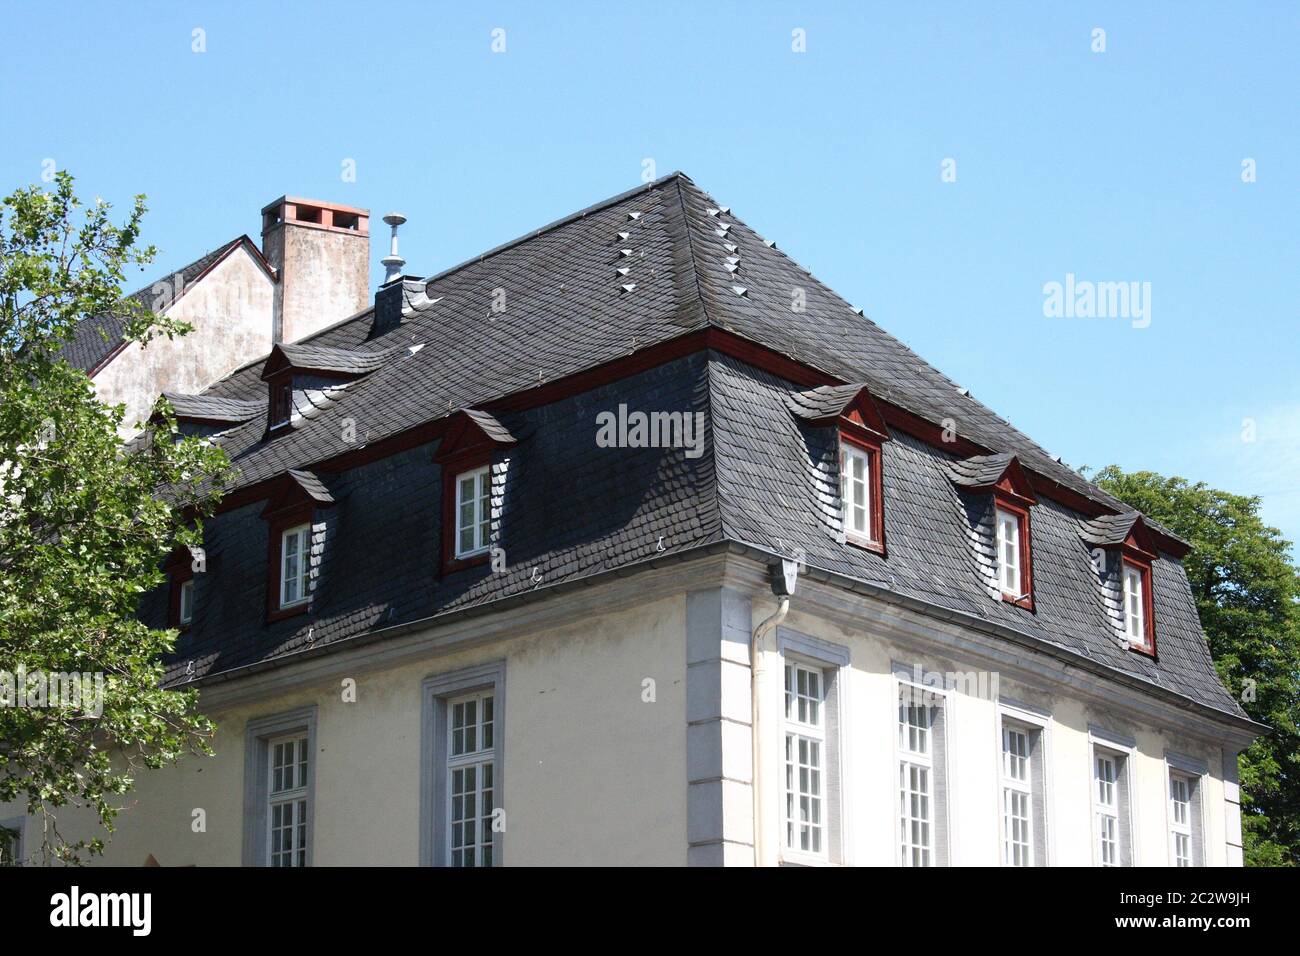 A slate roof with Windows and dormers Stock Photo